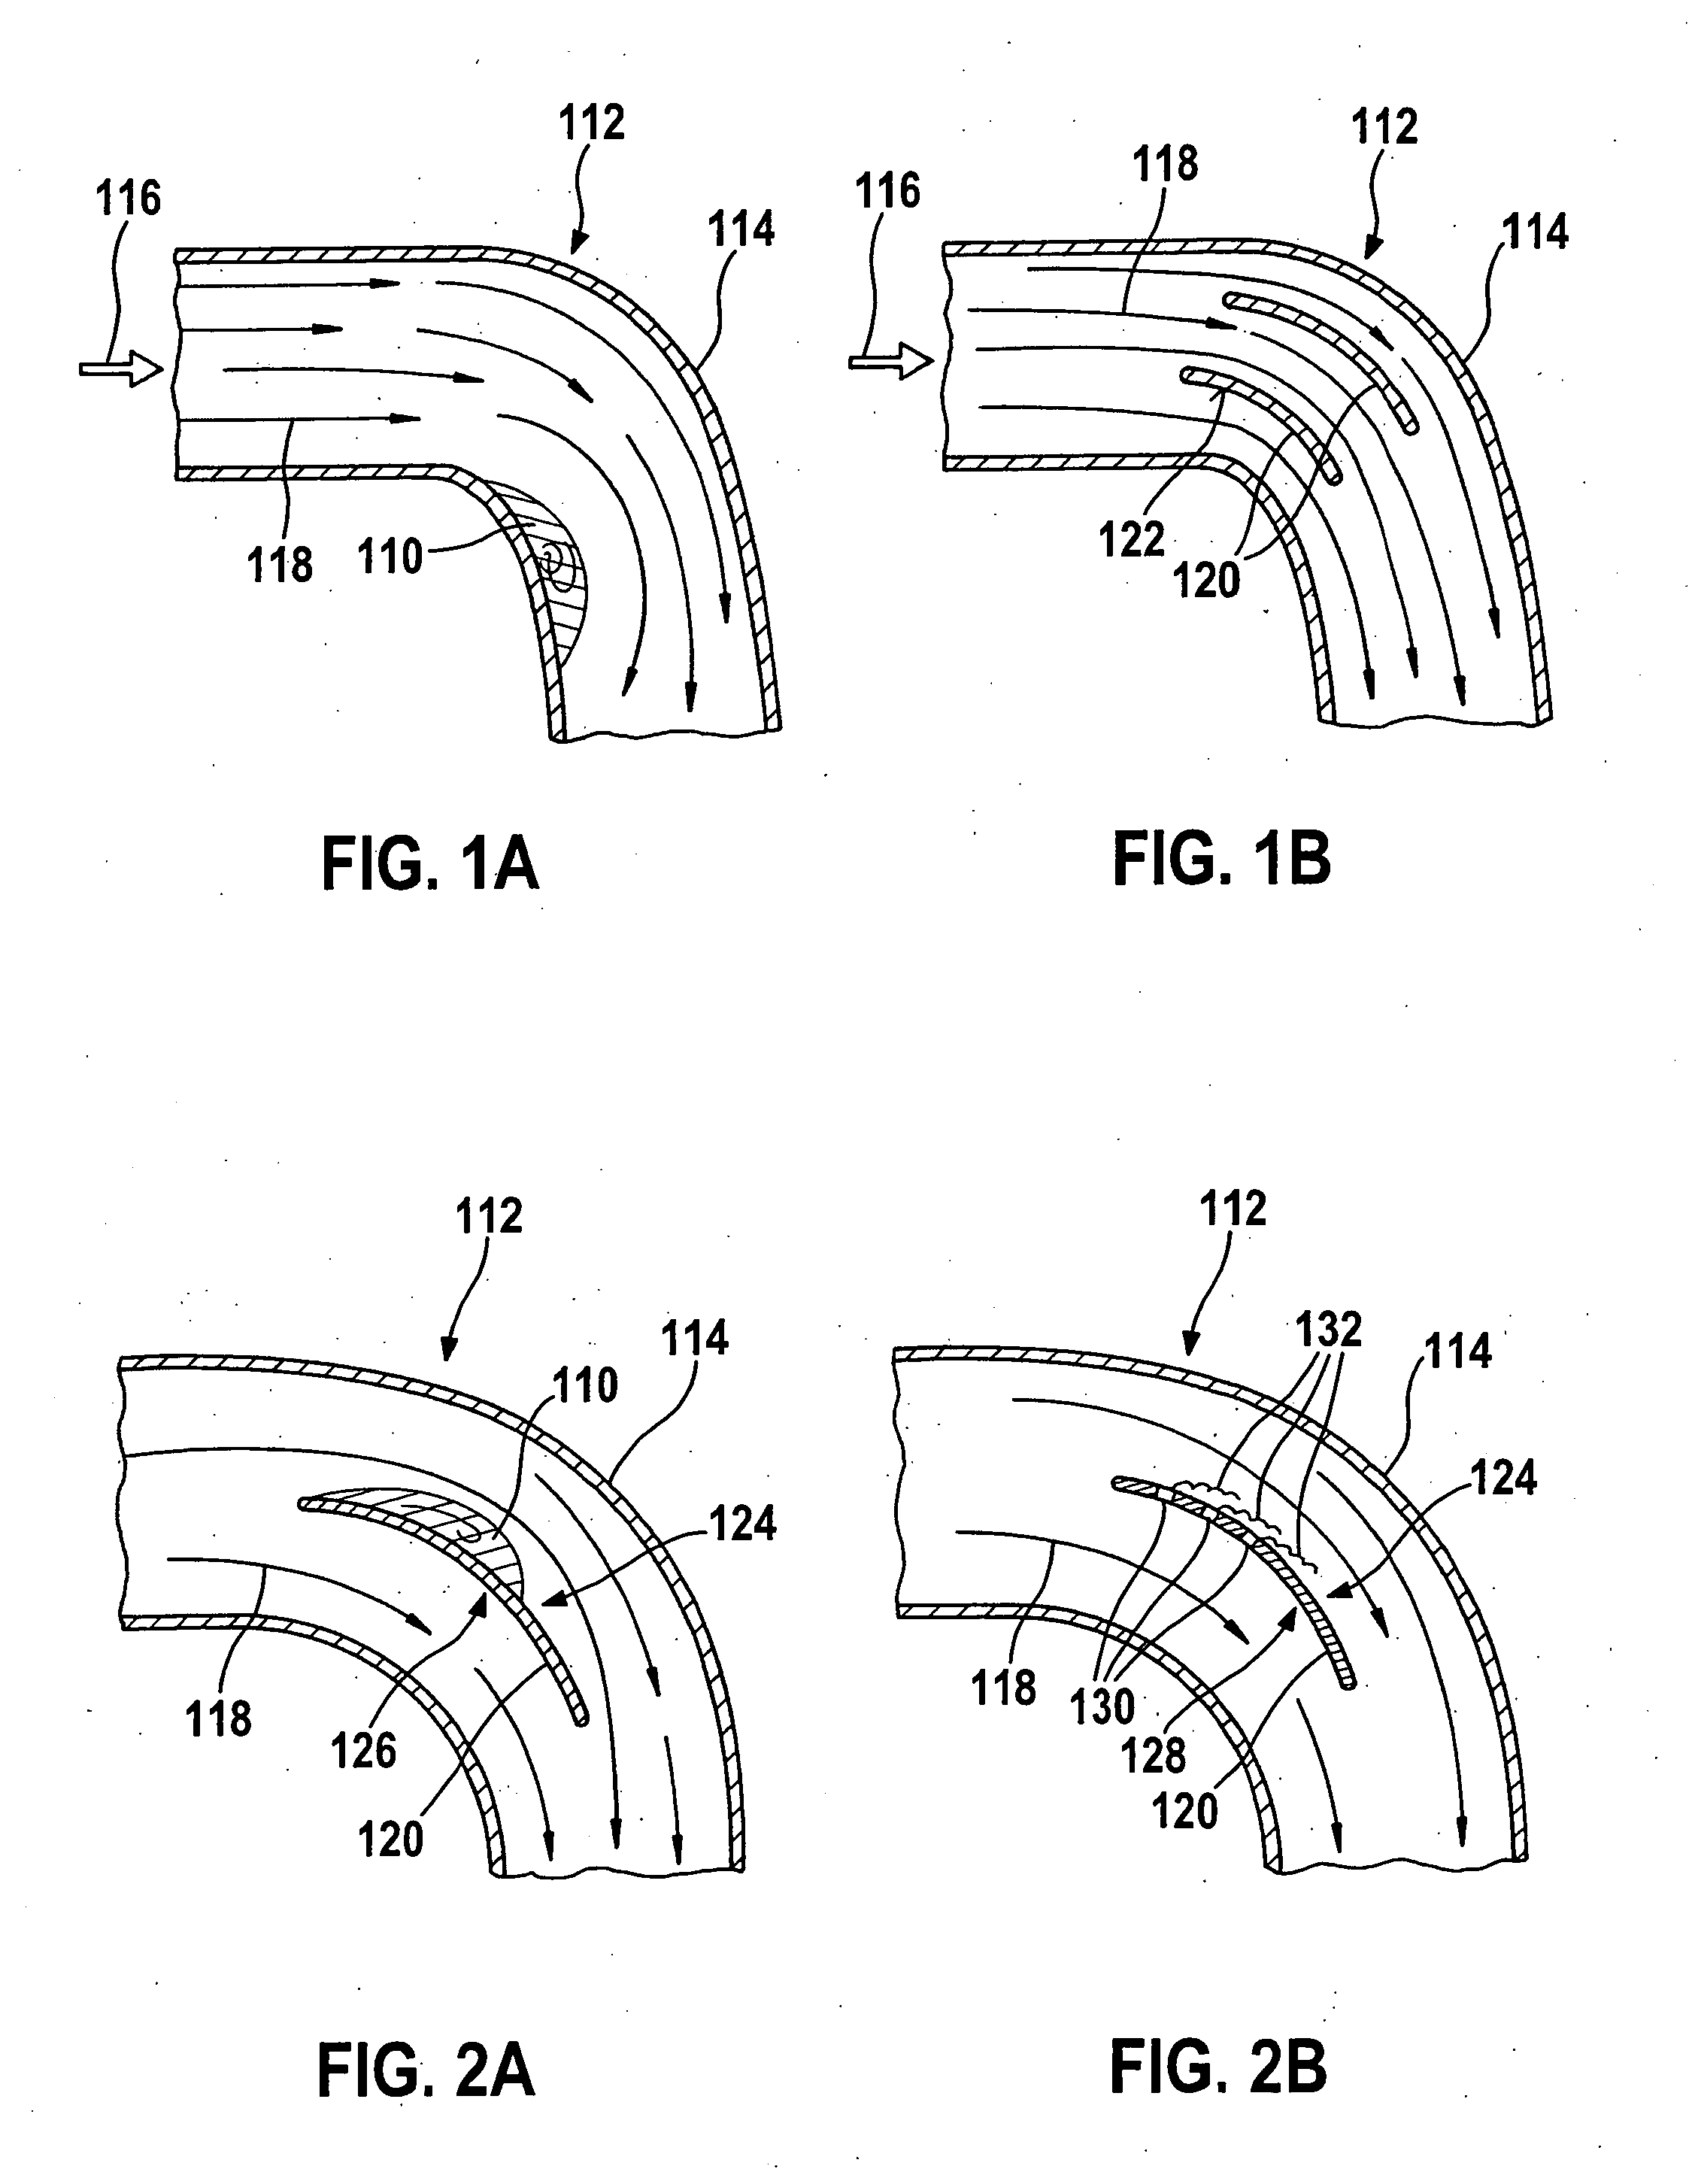 Program-Controlled Unit and Method for Operating Same